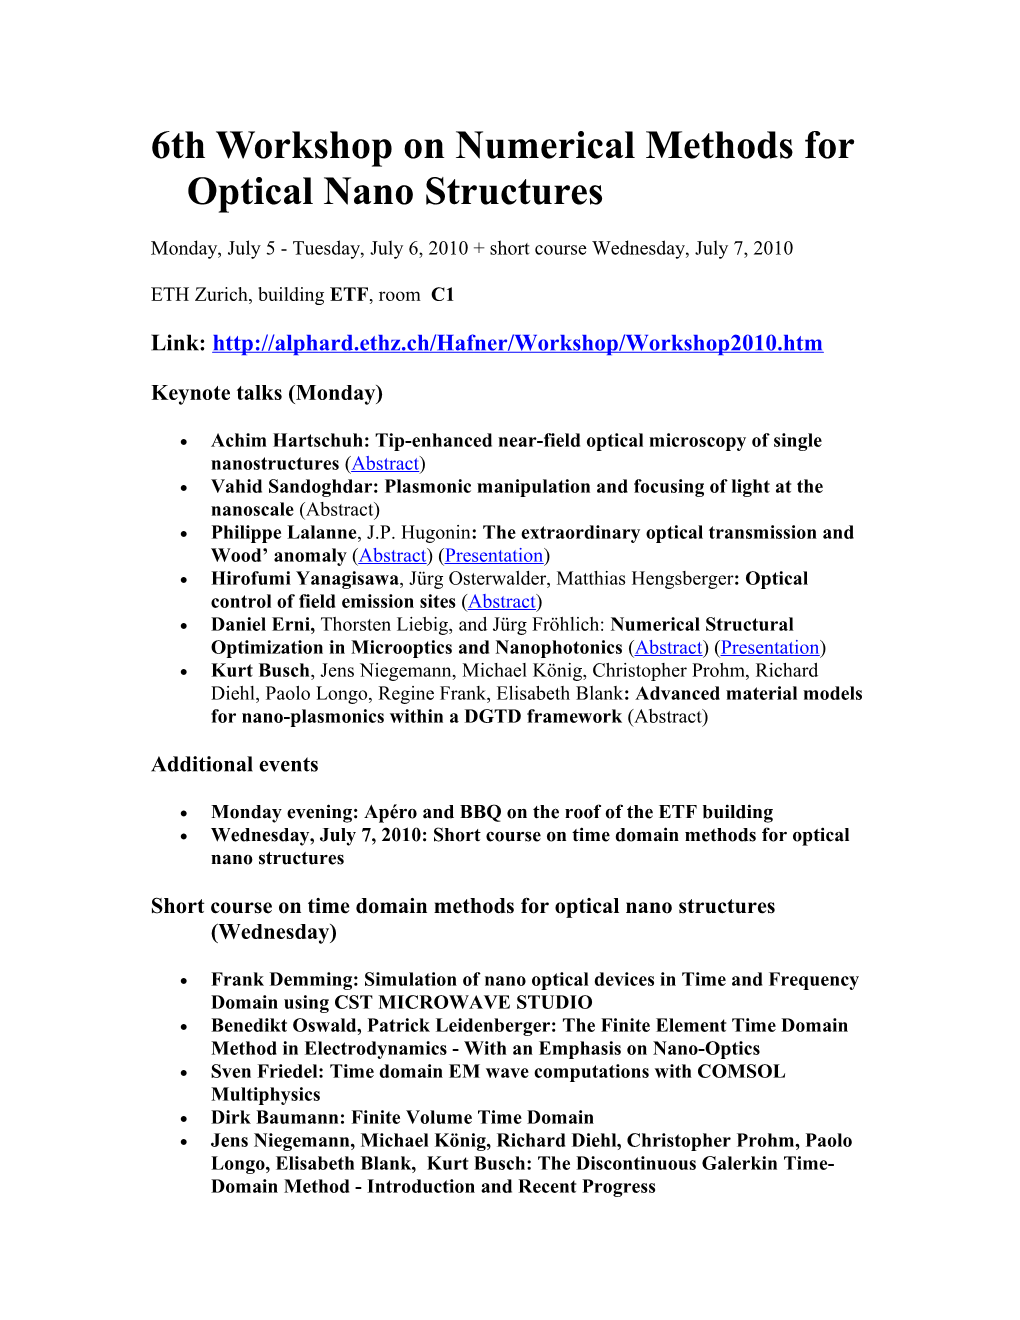 6Th Workshop on Numerical Methods for Optical Nano Structures